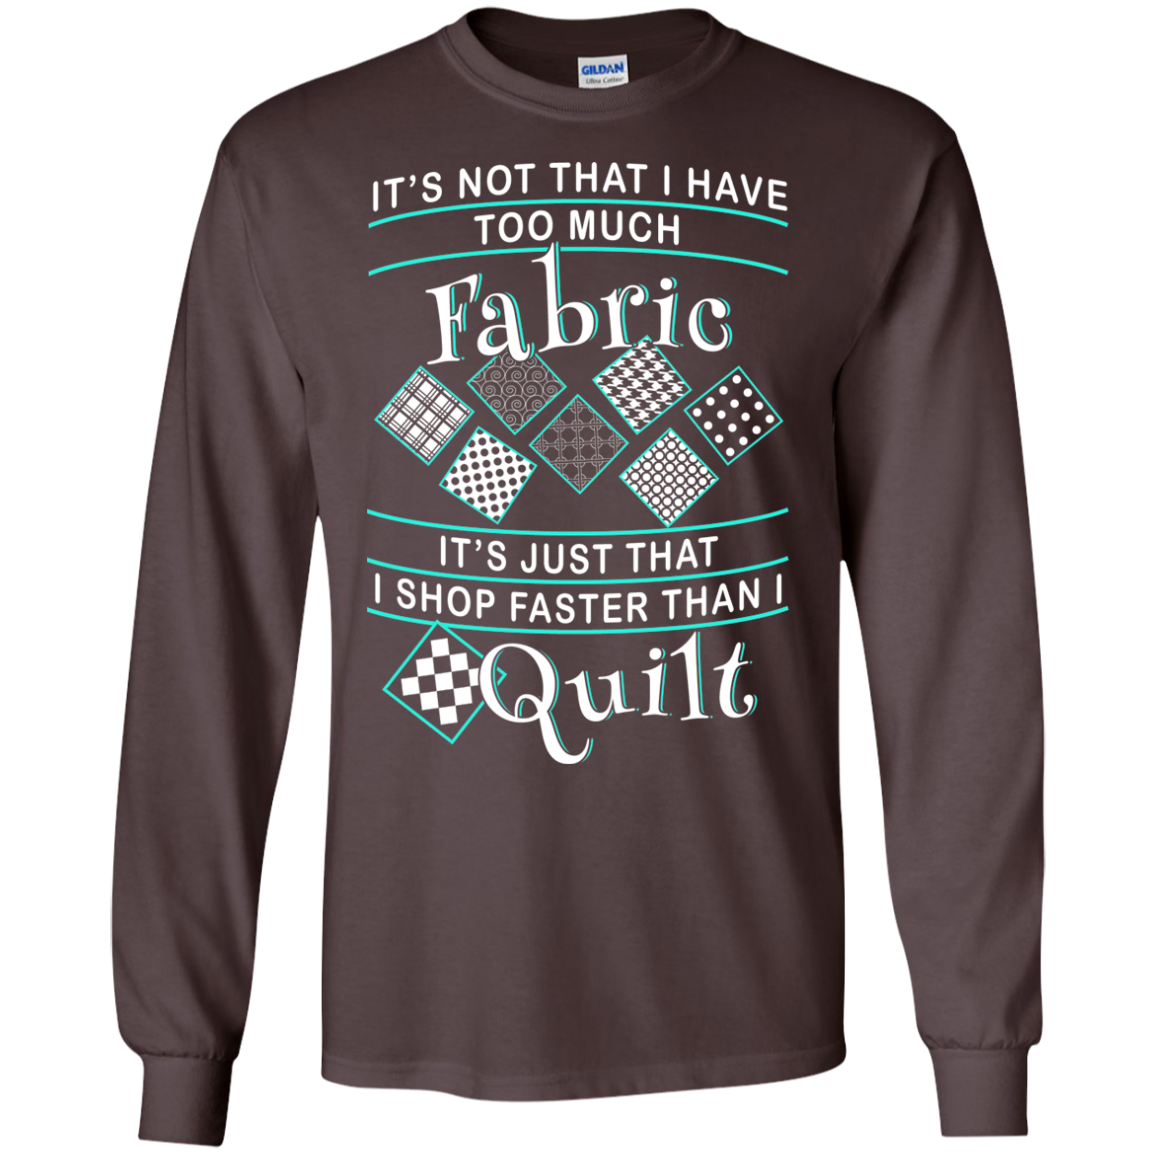 I Shop Faster than I Quilt Long Sleeve Ultra Cotton T-Shirt - Crafter4Life - 3